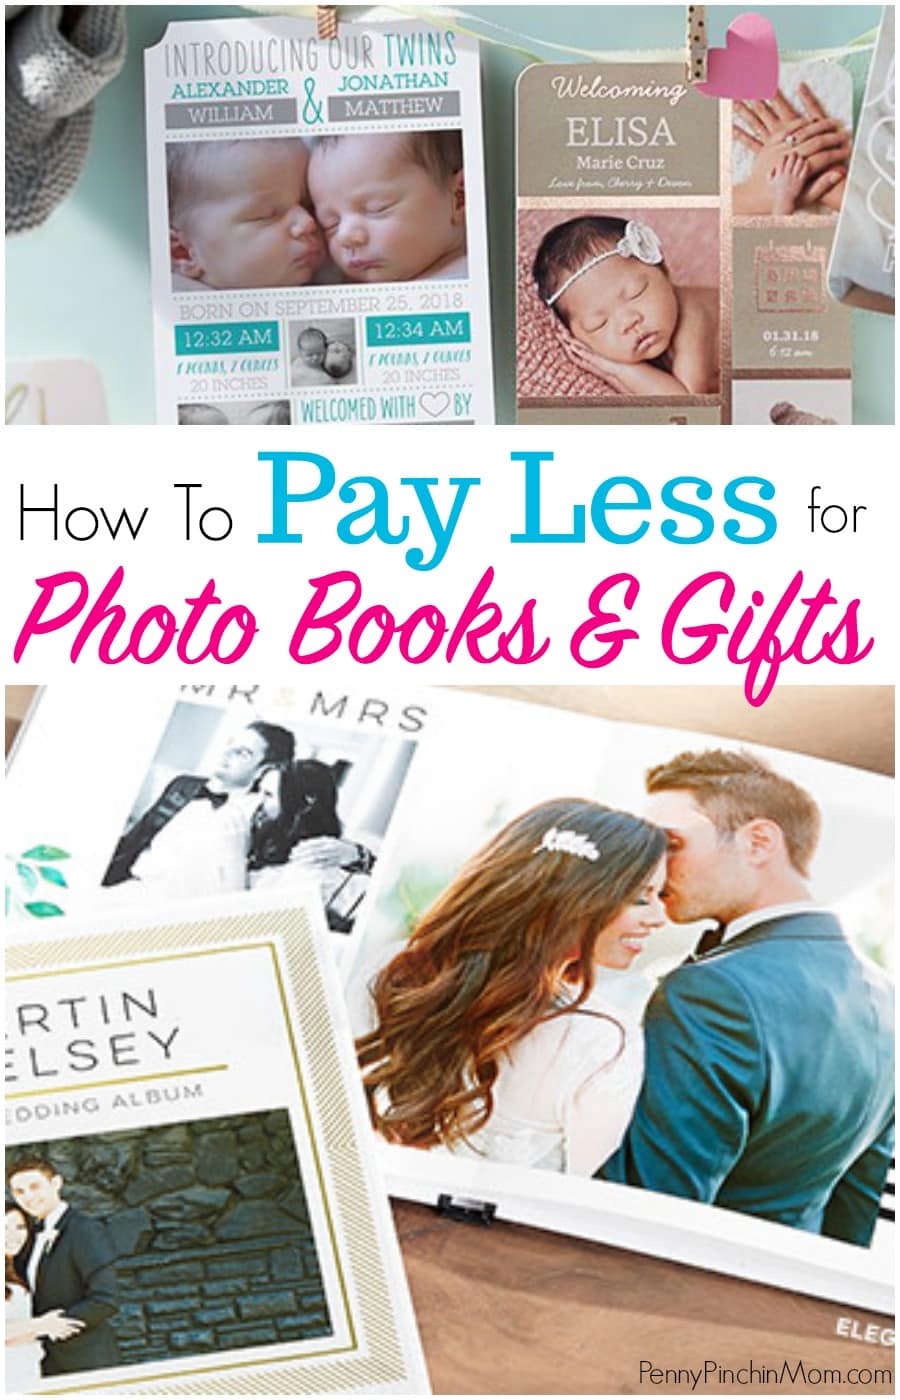 Shutterfly Promo Codes And Free Shipping Offers